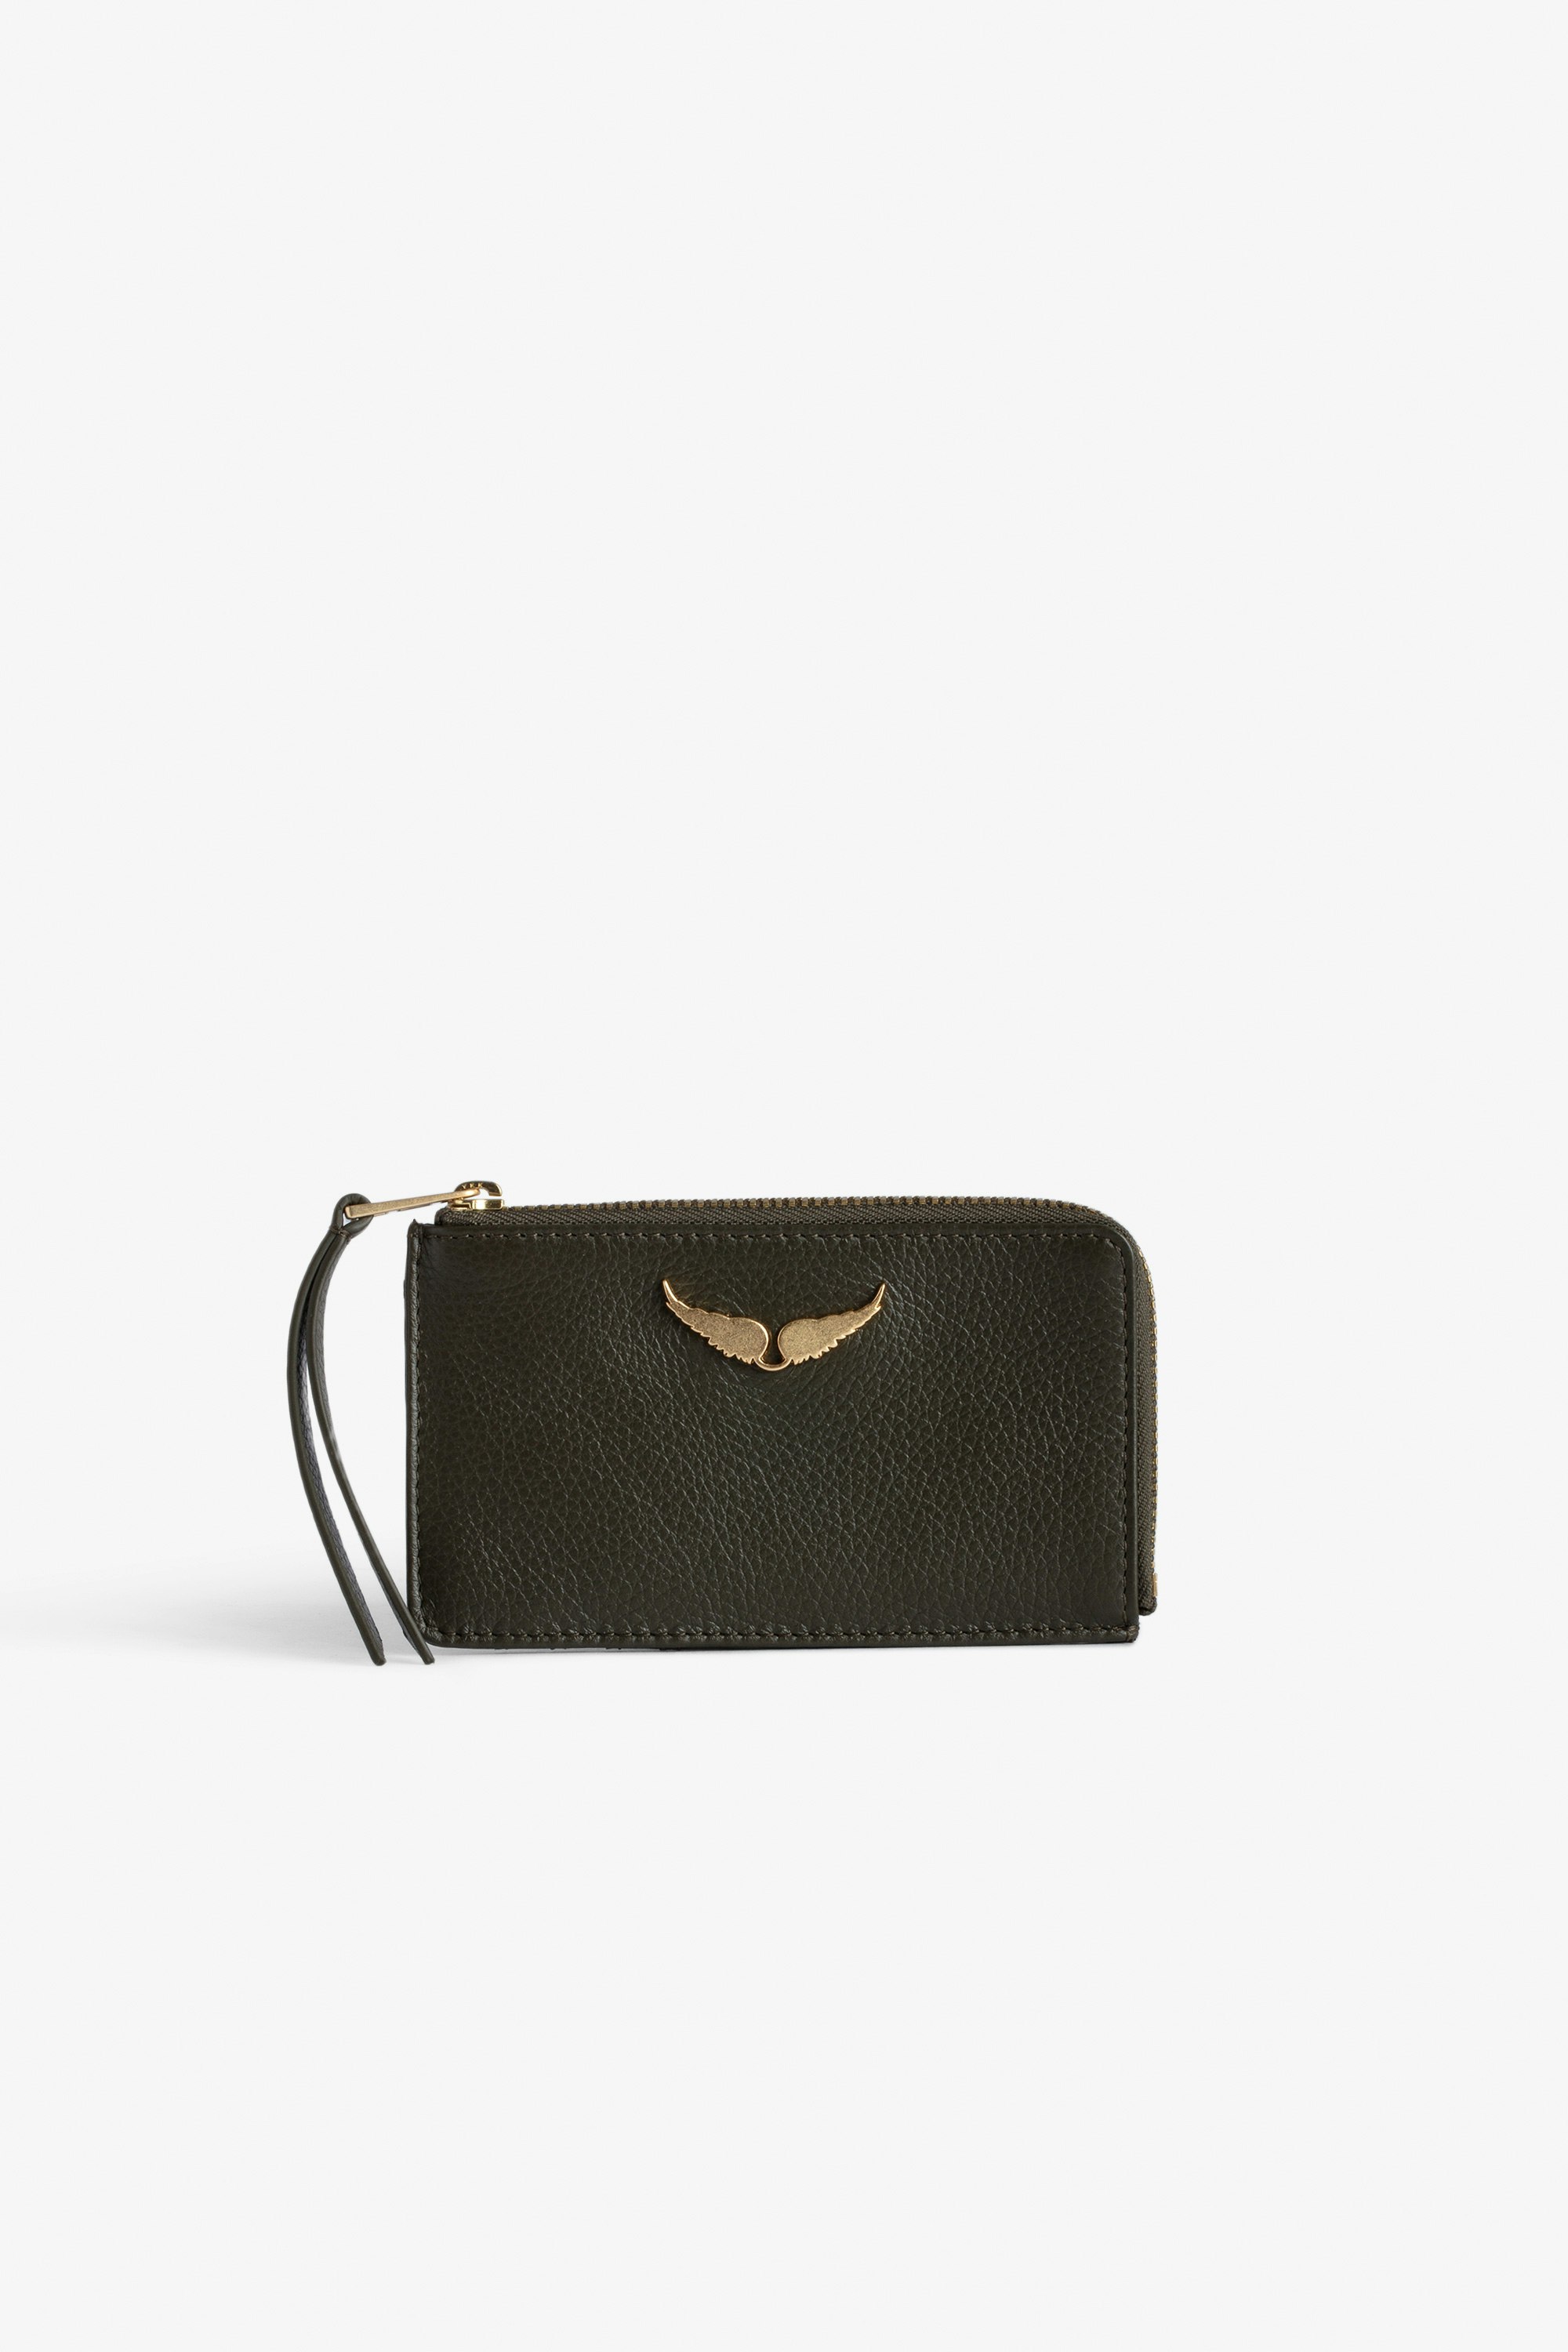 ZV Card 財布 Women’s khaki grained leather card holder with wings charm.